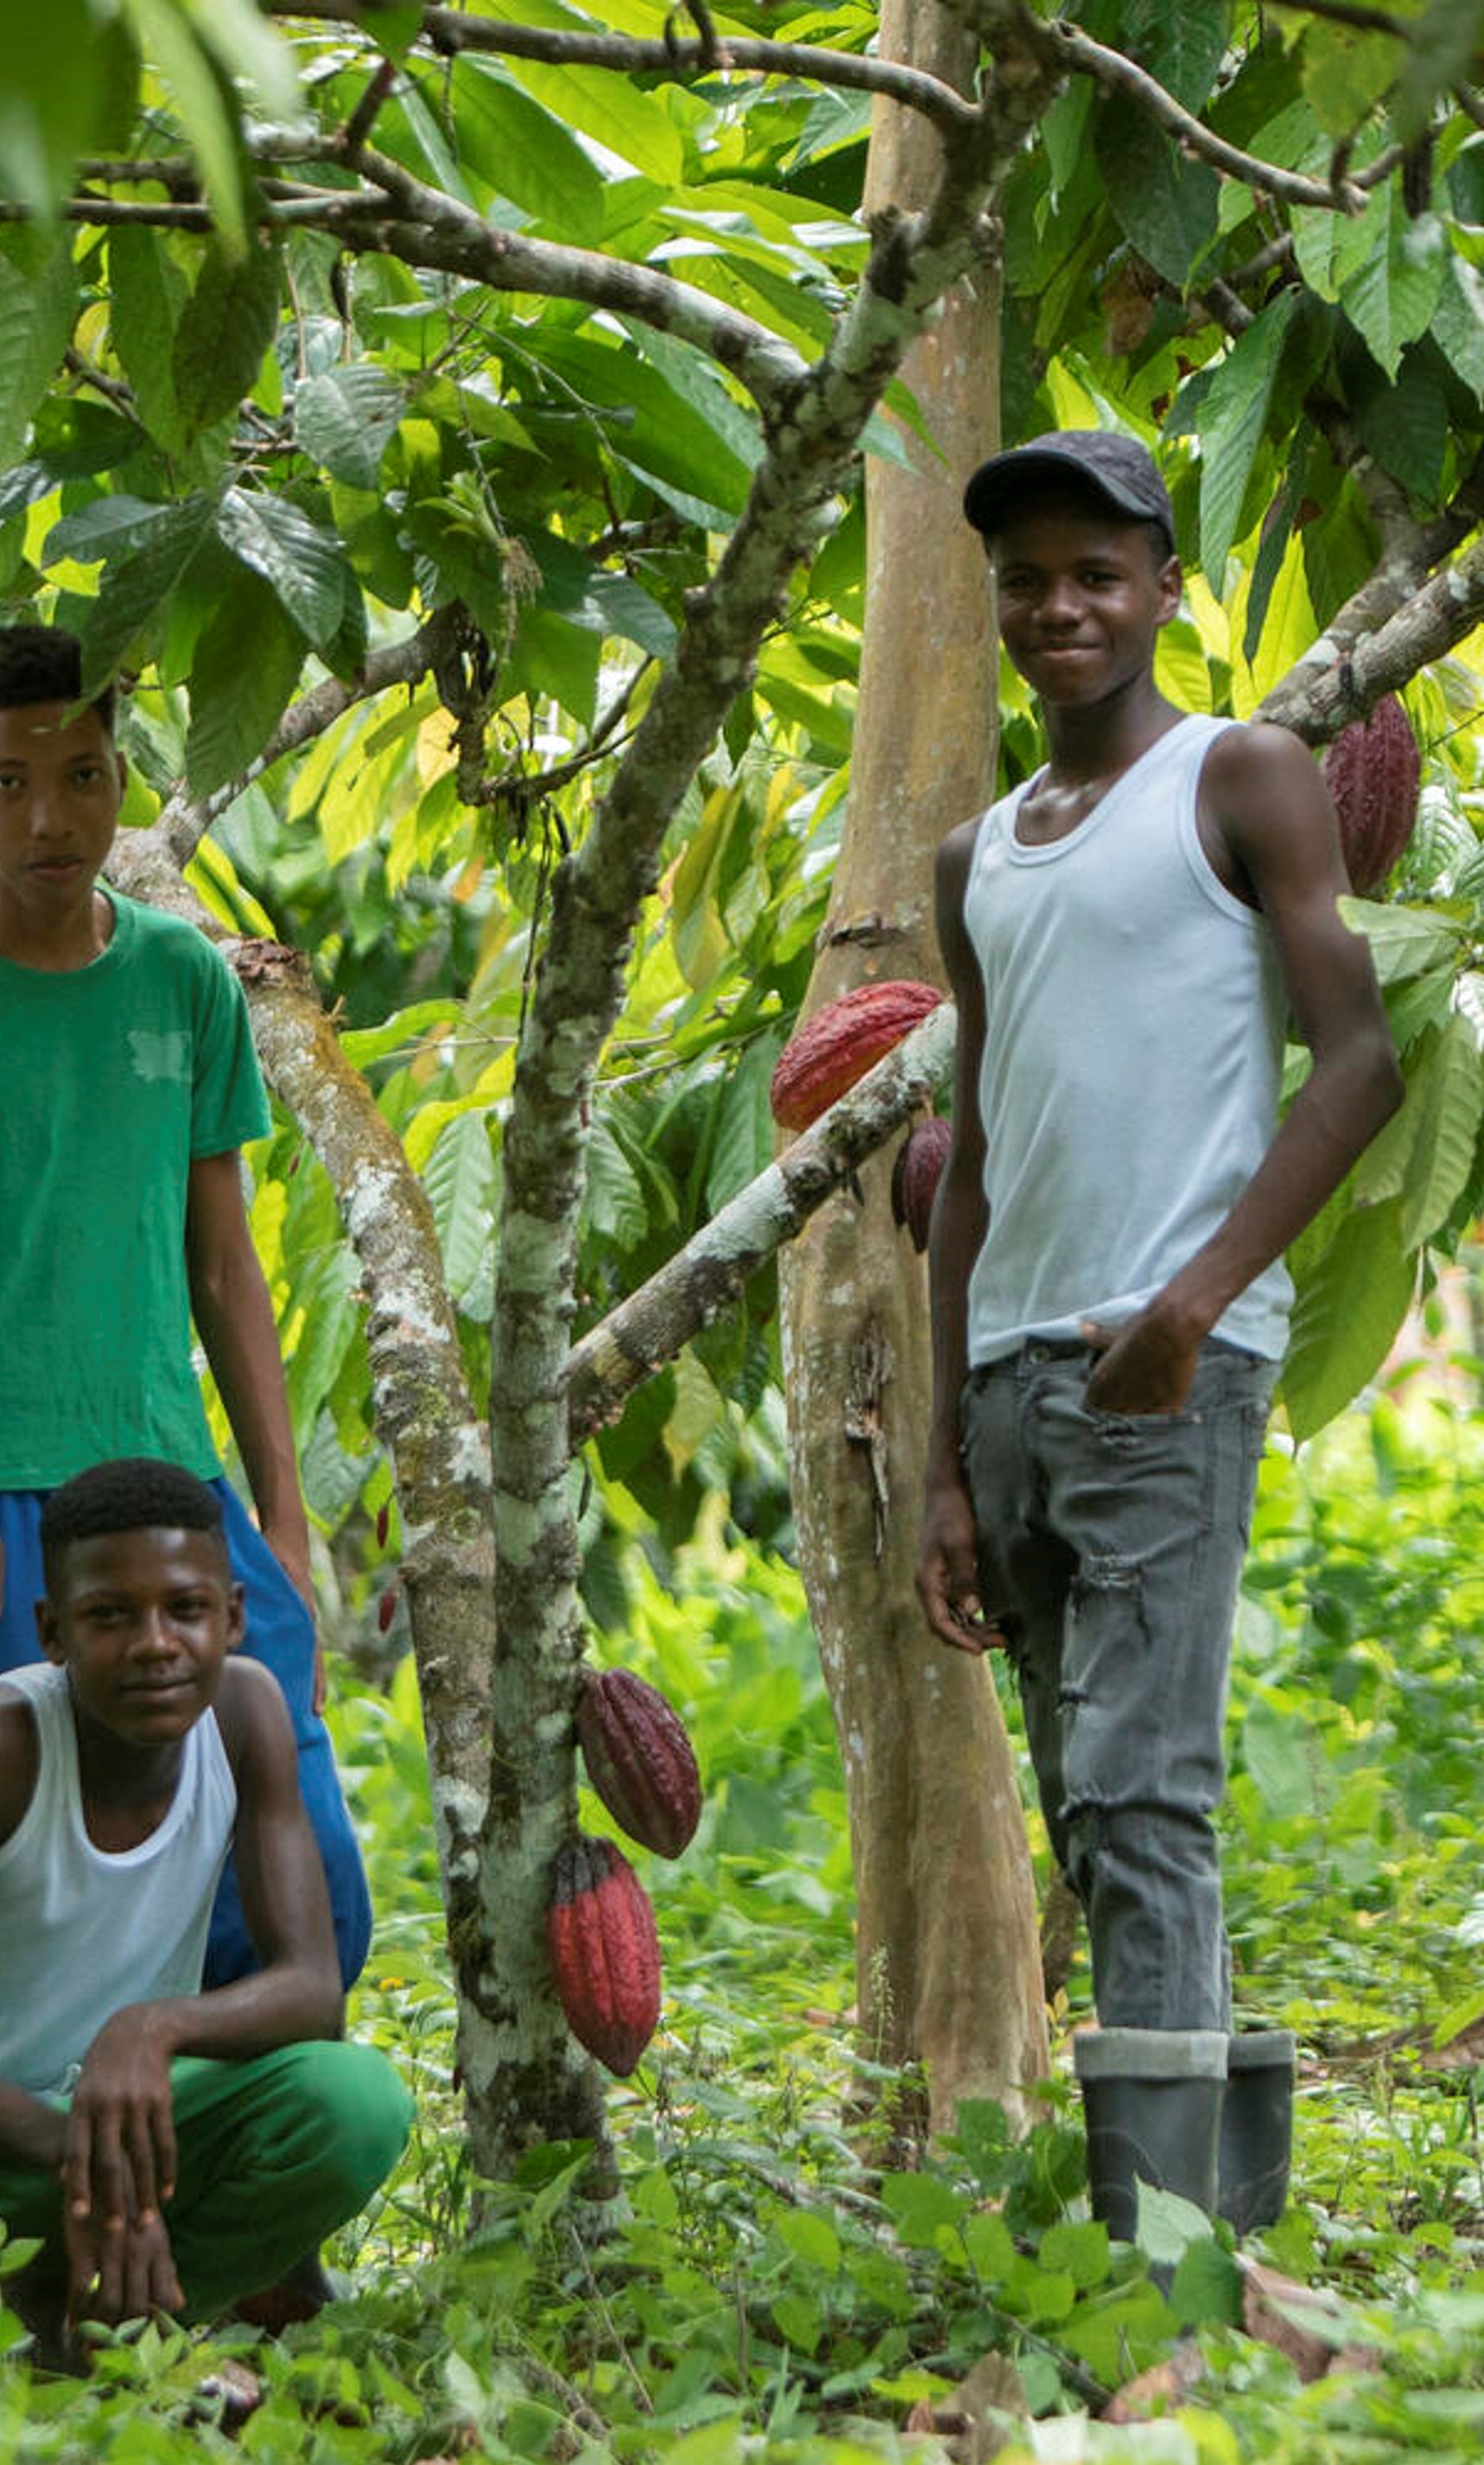 Young farmers in the Caribbean